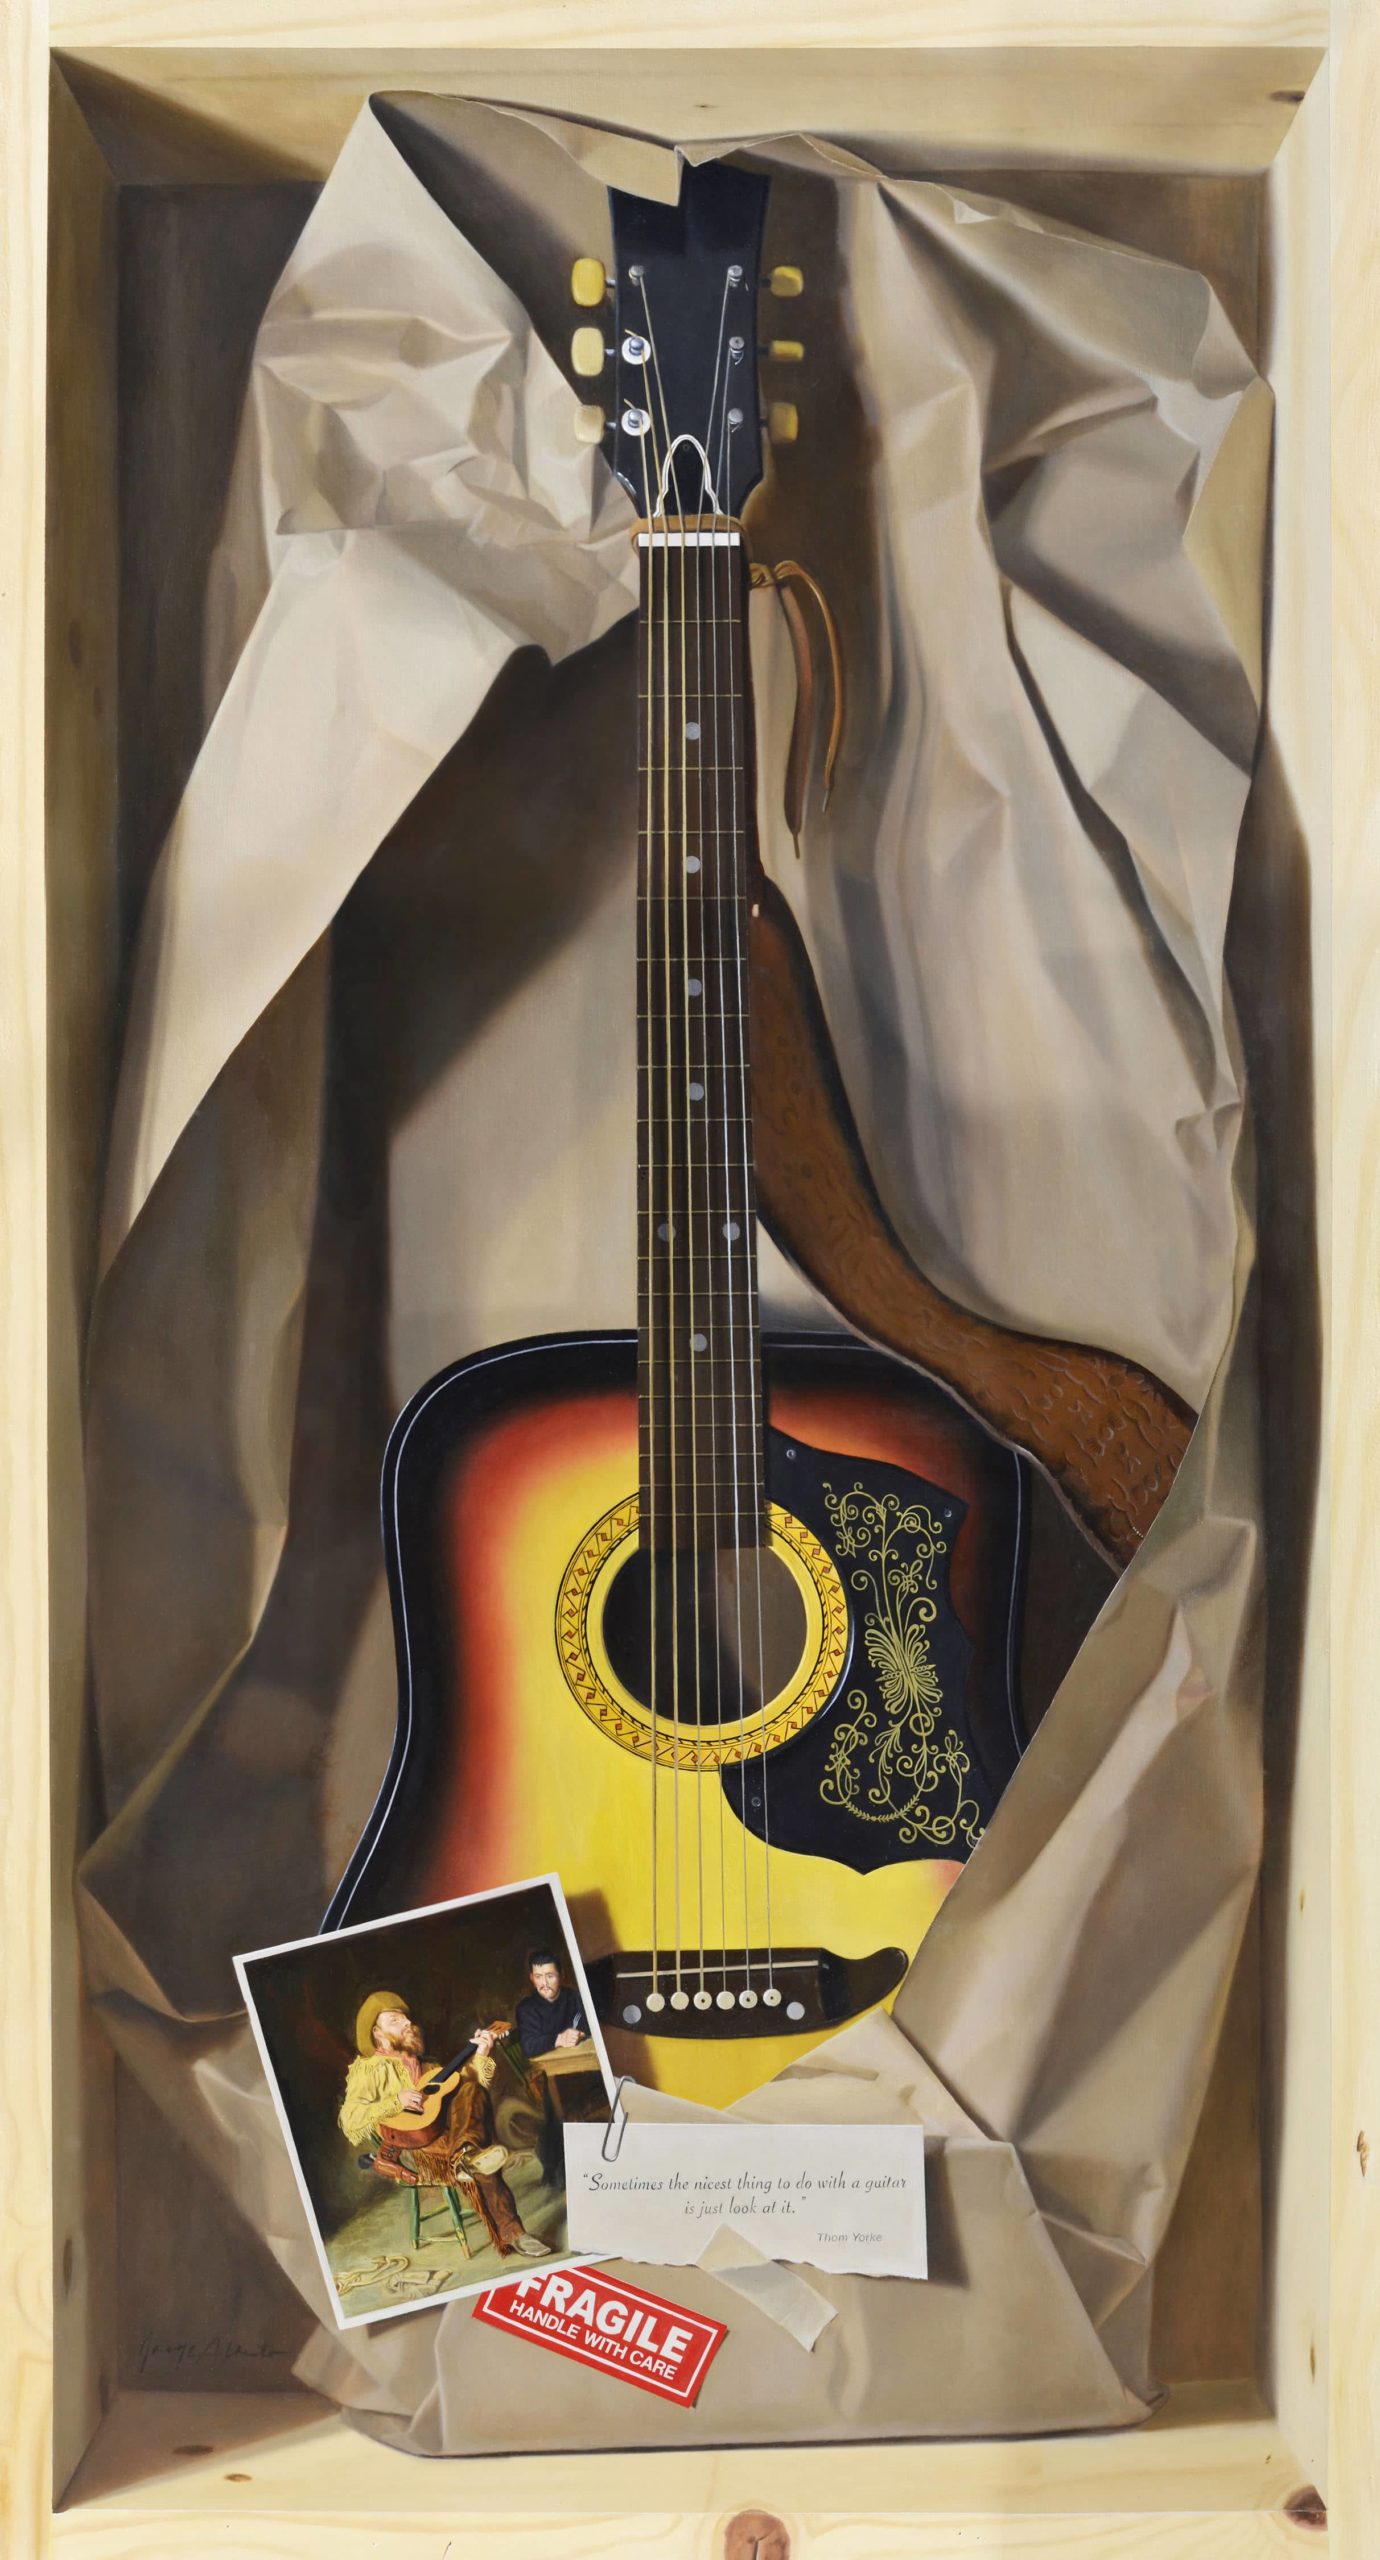 A trompe l'oeil style painting showing a guitar wrapped in brown paper inside wooden box.